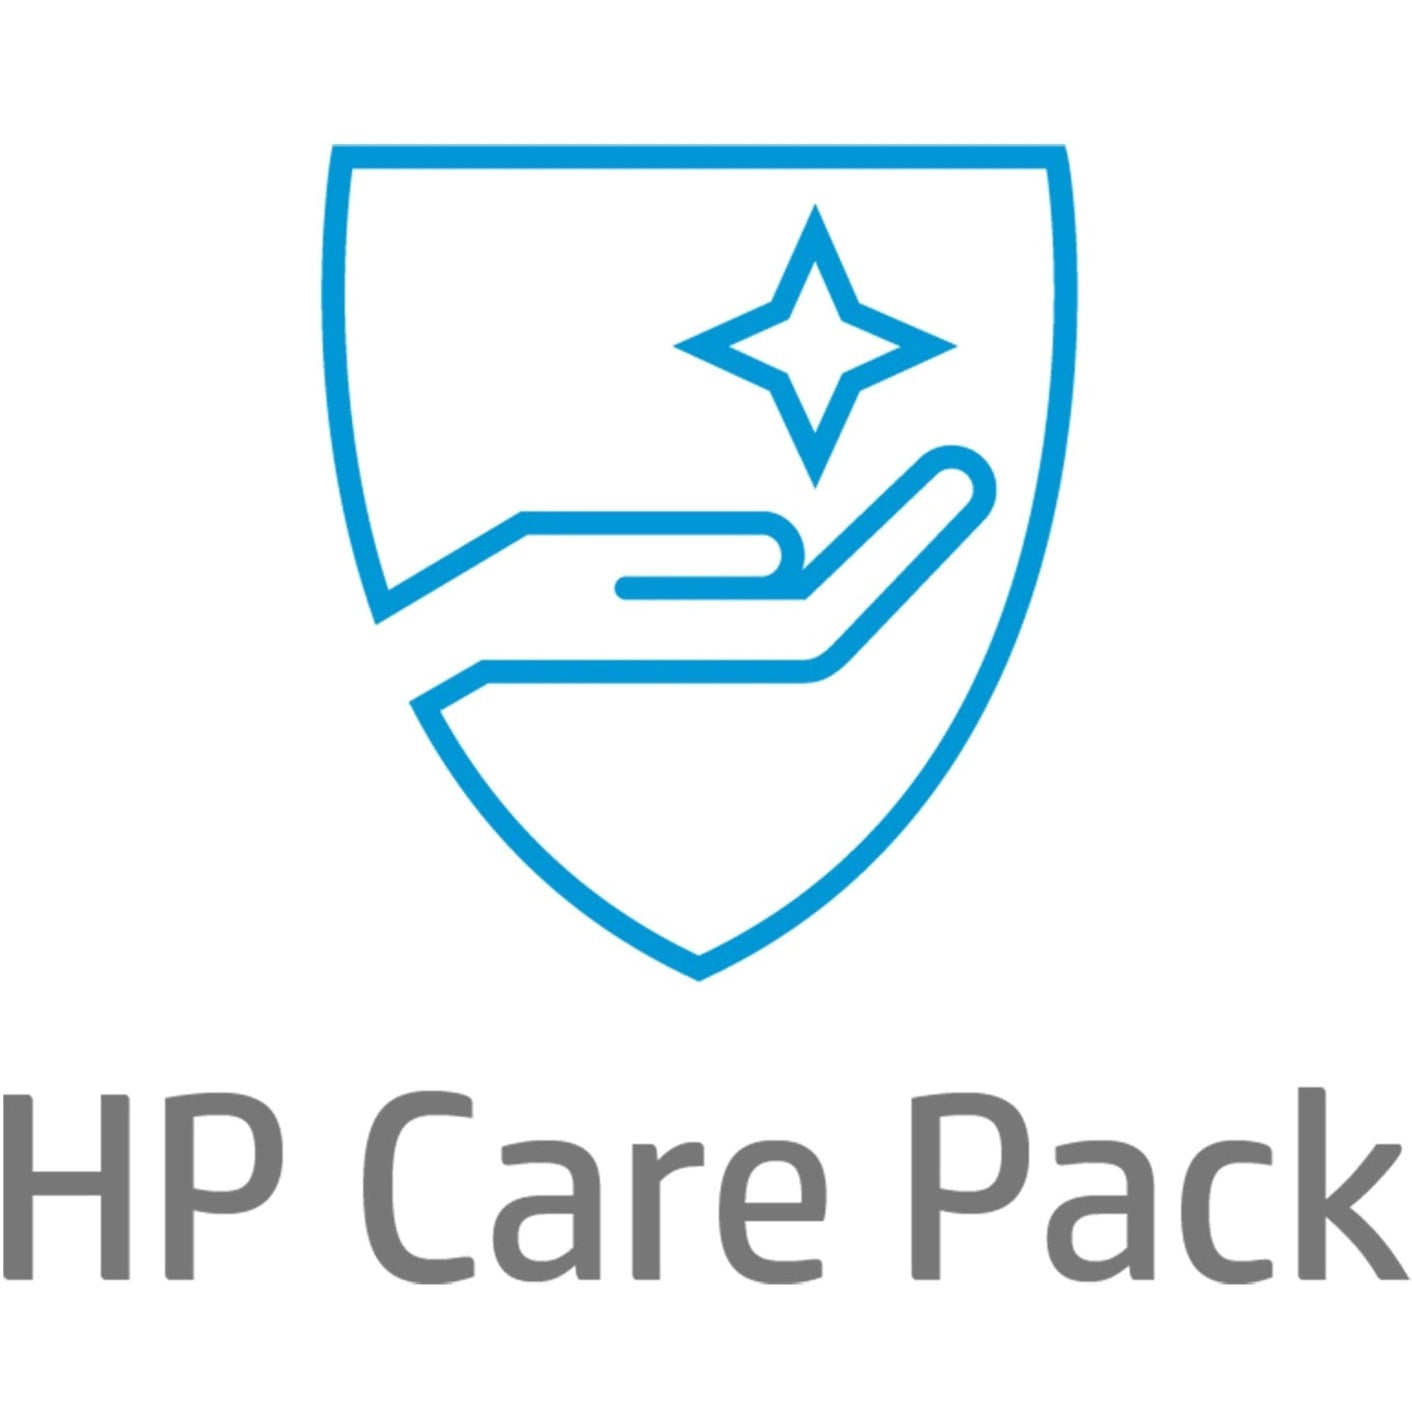 HP Care Pack - 3 Year - Warranty (UE335E)